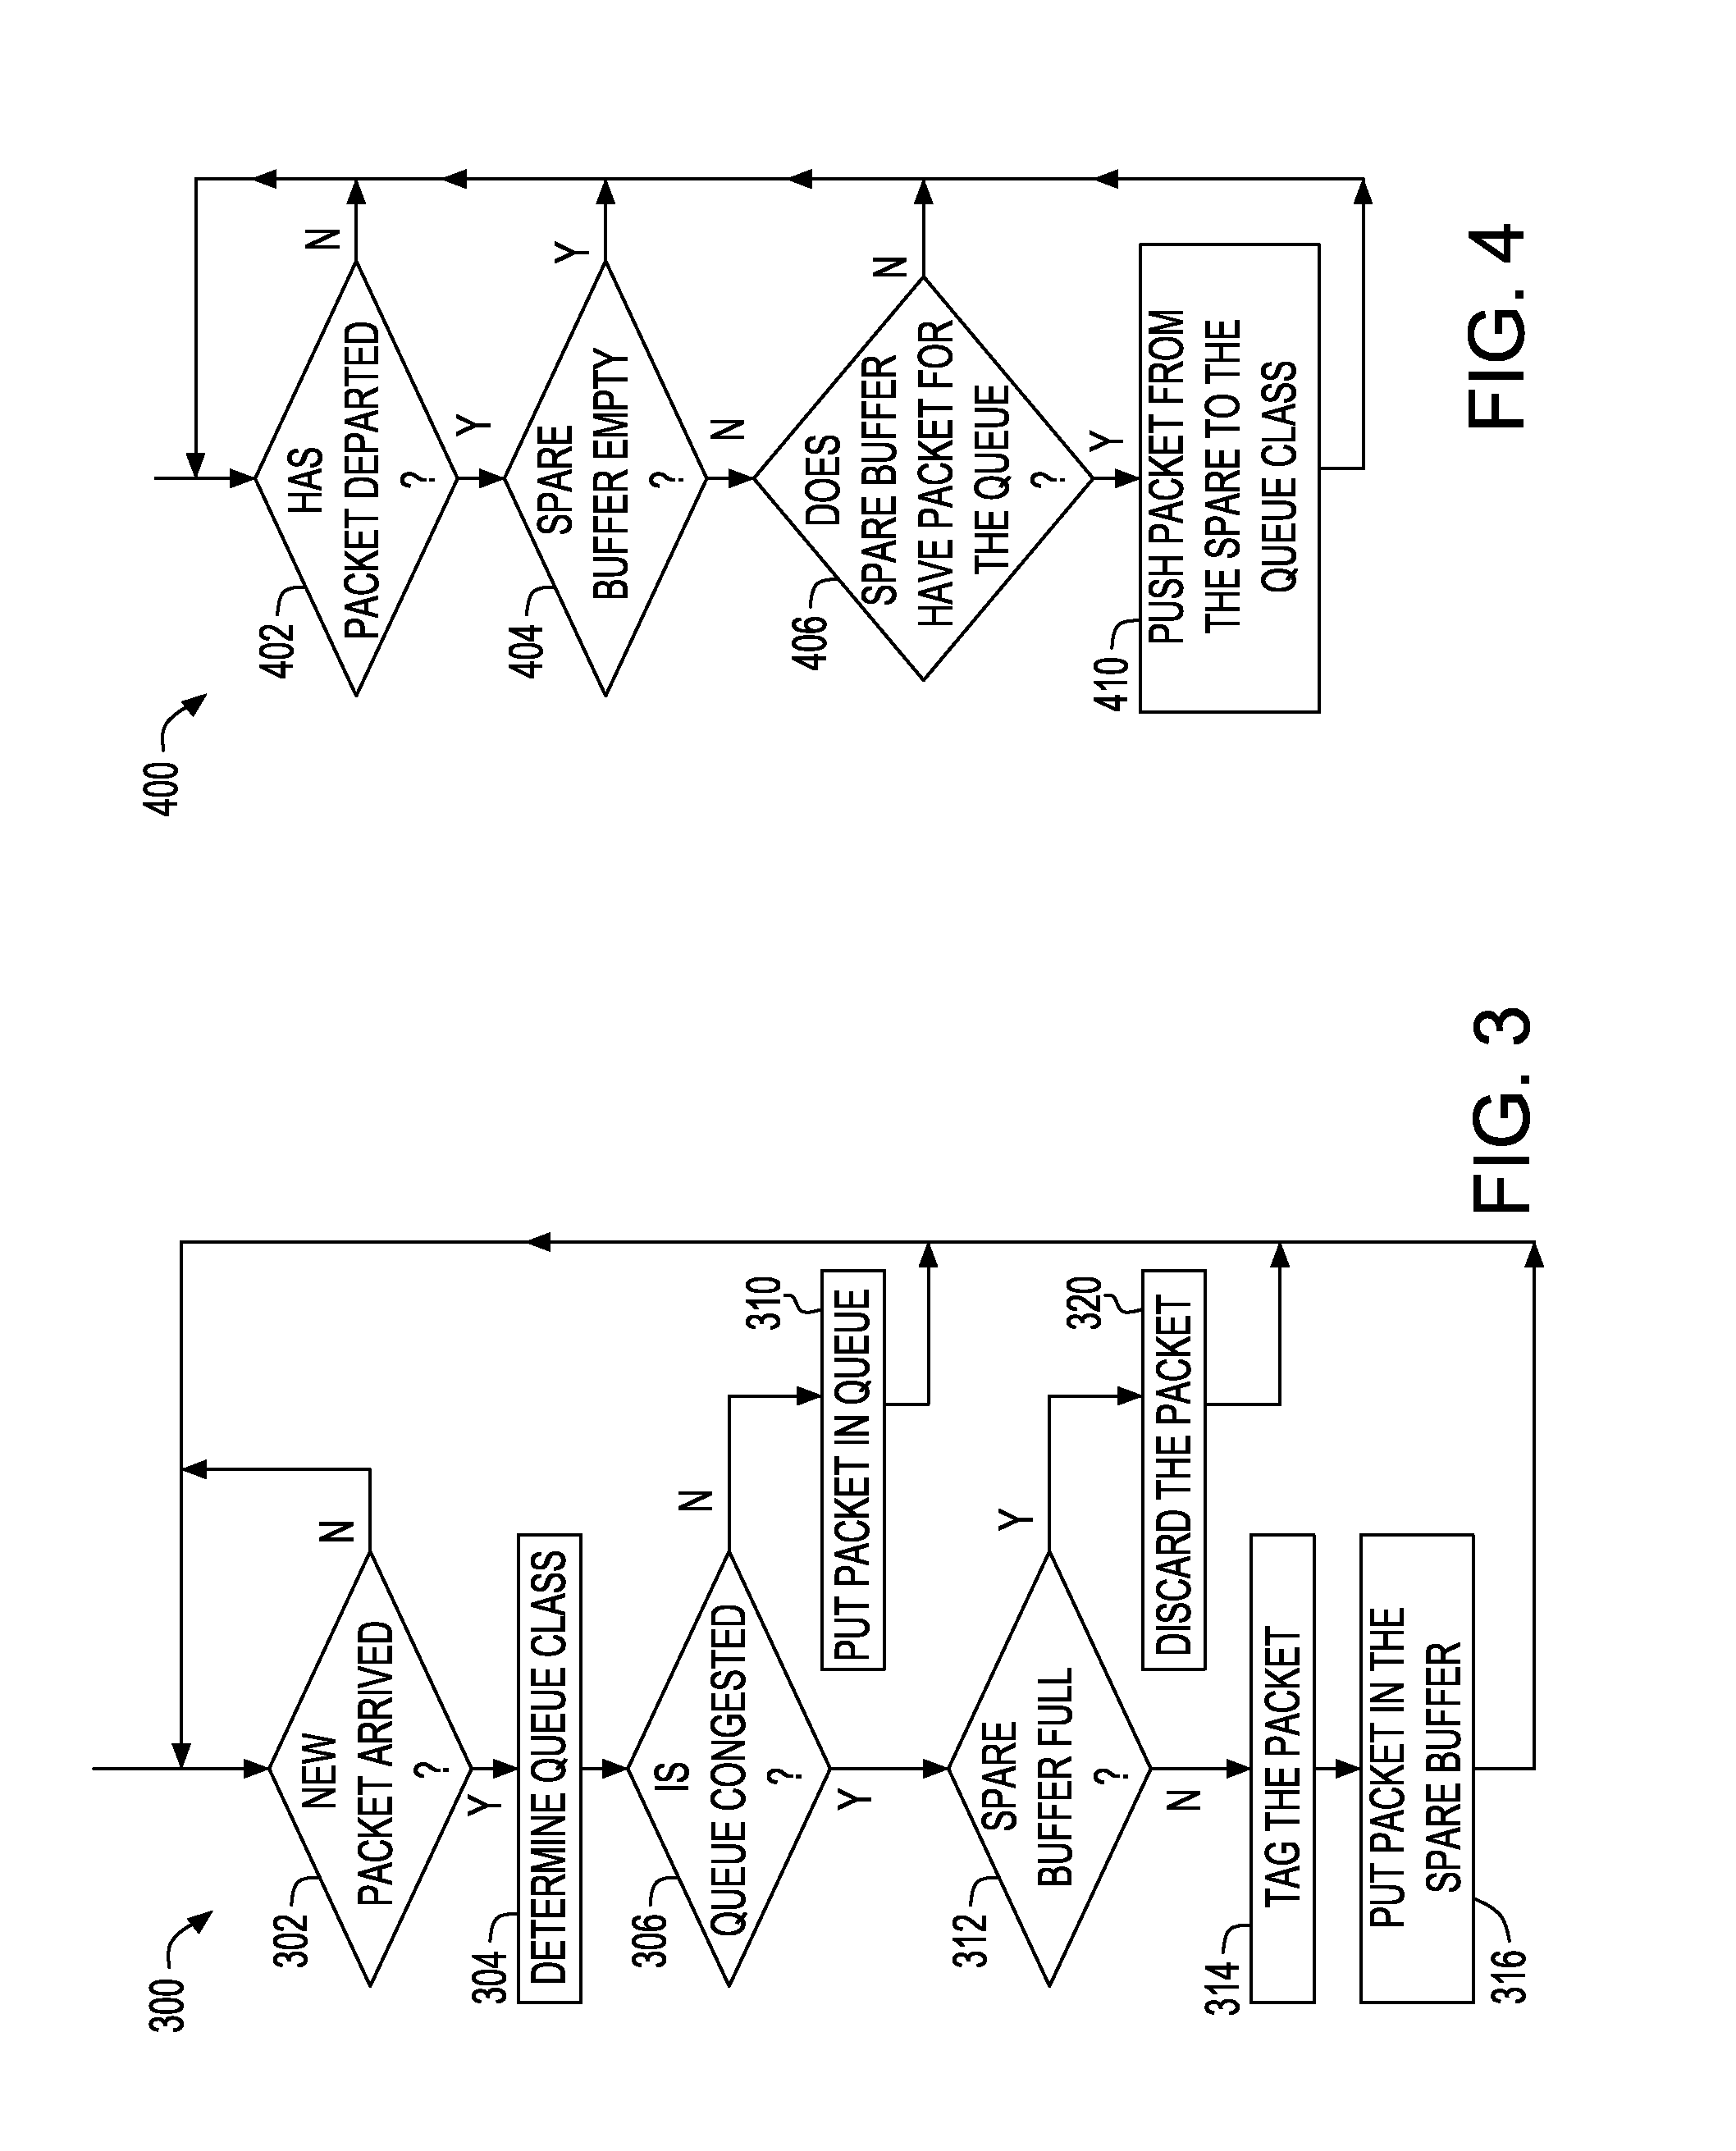 Buffer allocation method for multi-class traffic with dynamic spare buffering